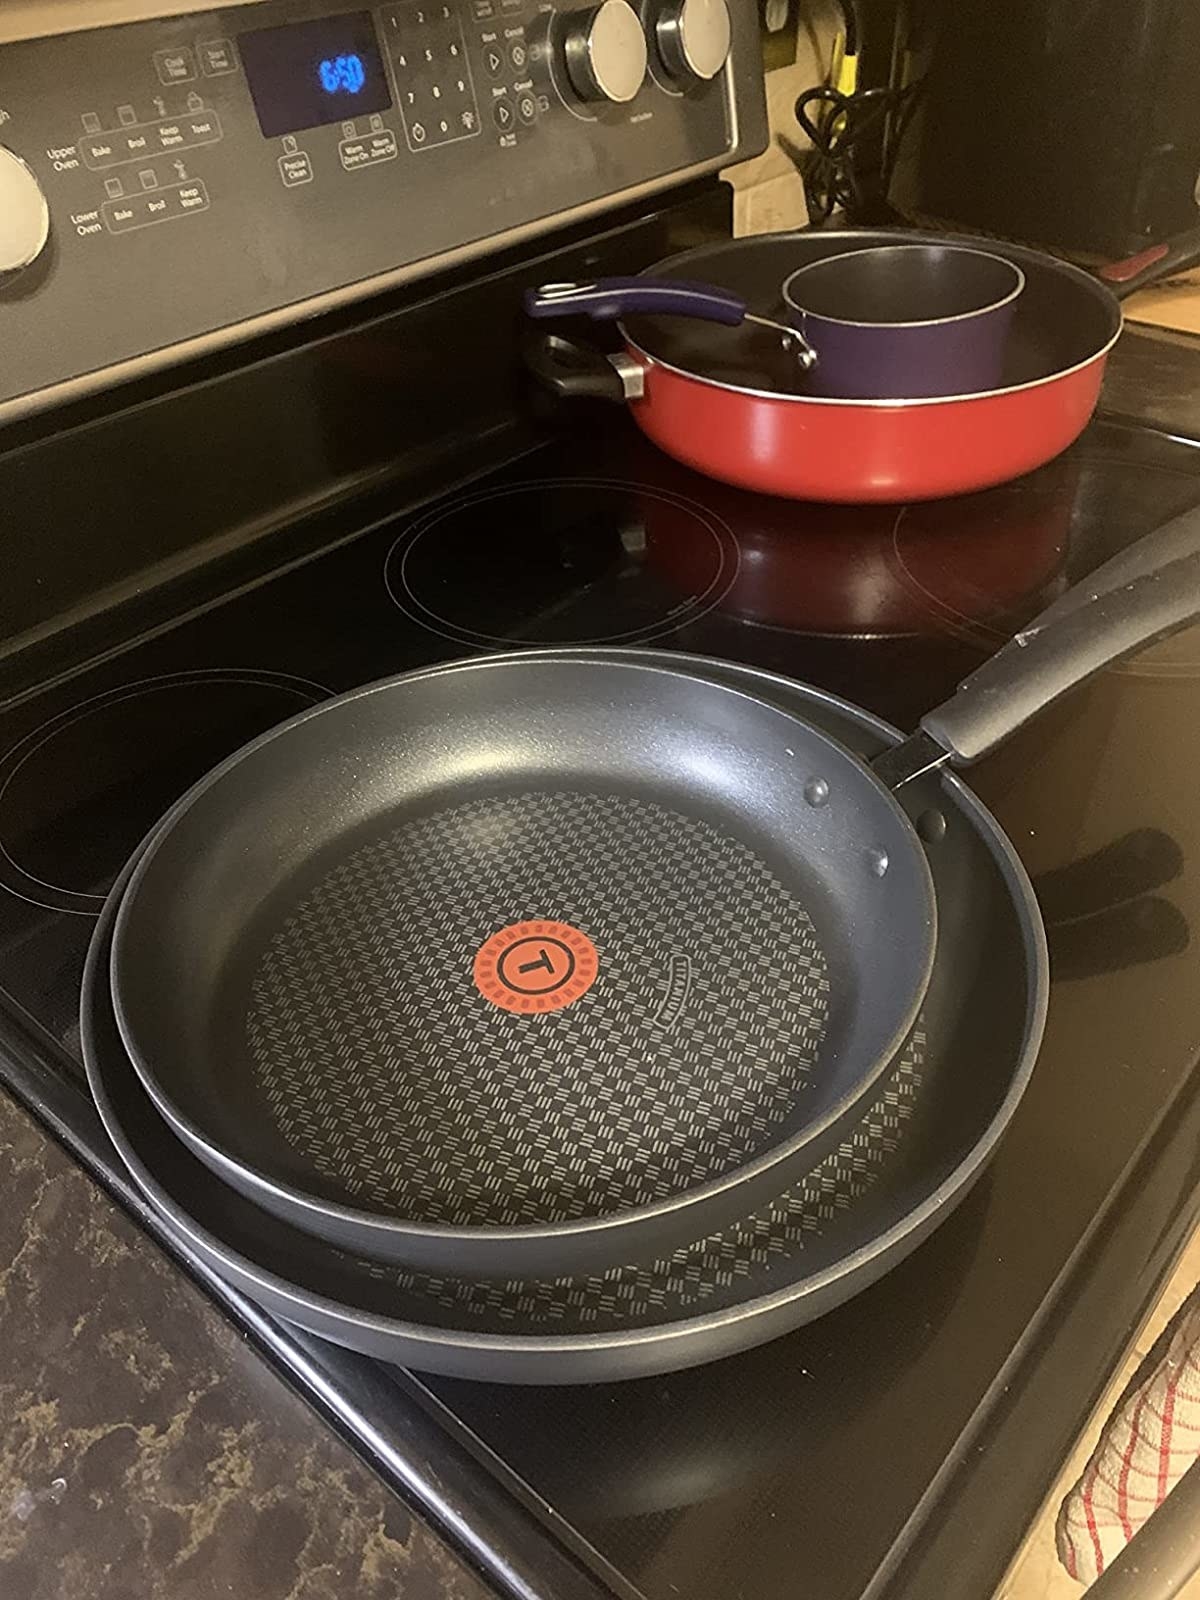 the two black pans stacked on a stove